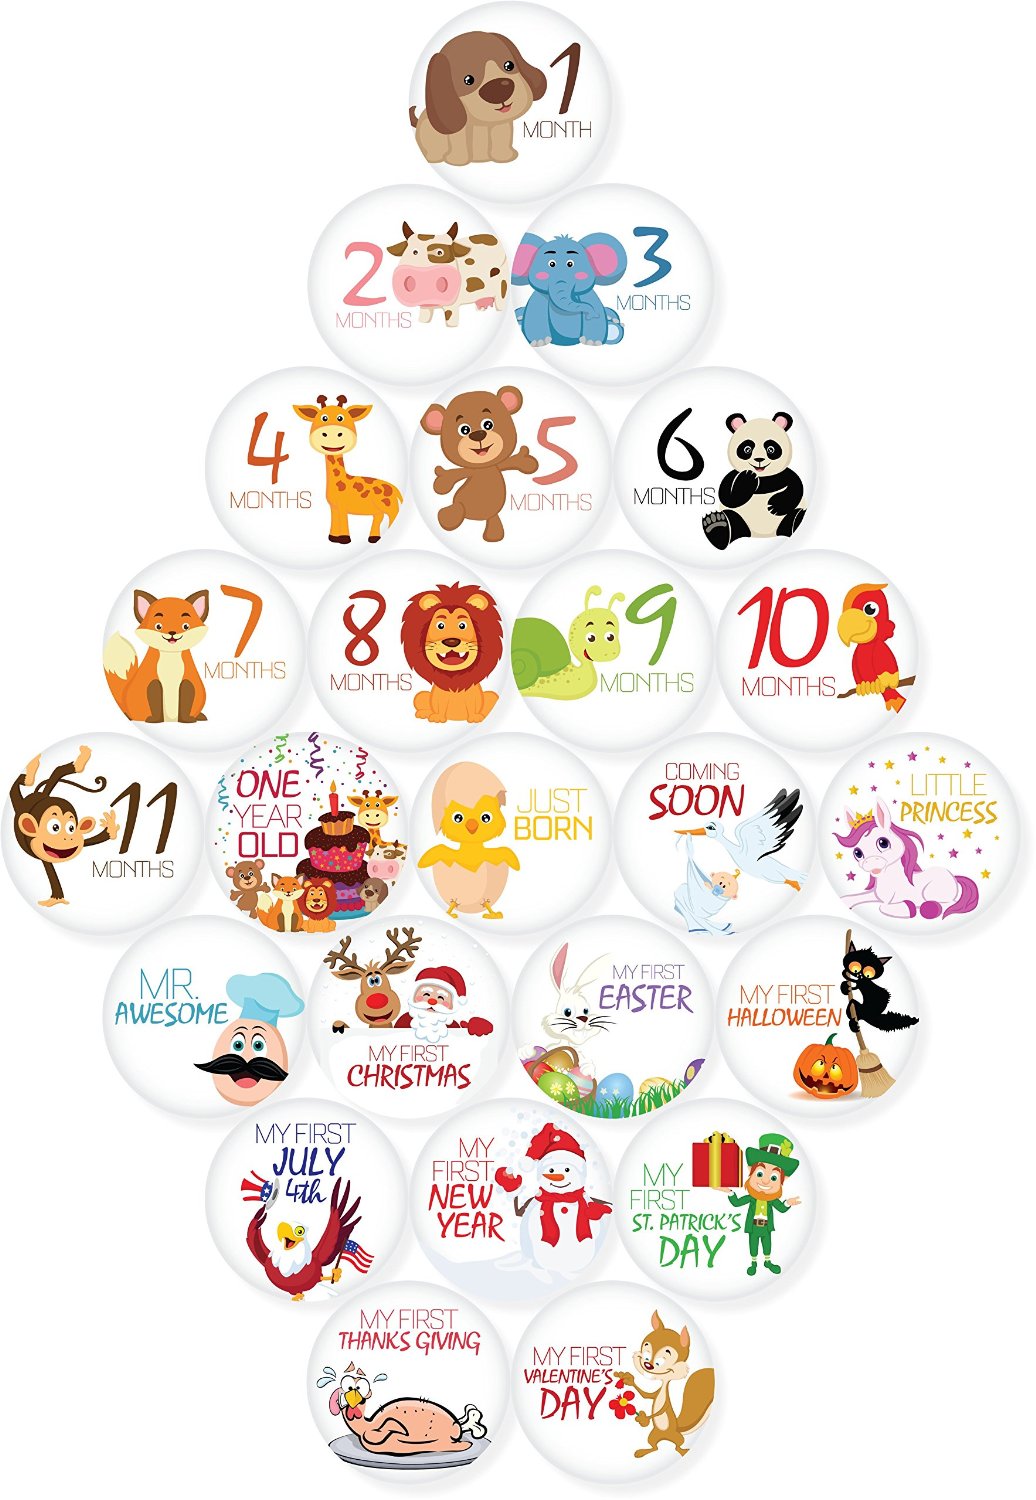 Very cute baby month stickers - put these on your child for a picture each month to show their growth.